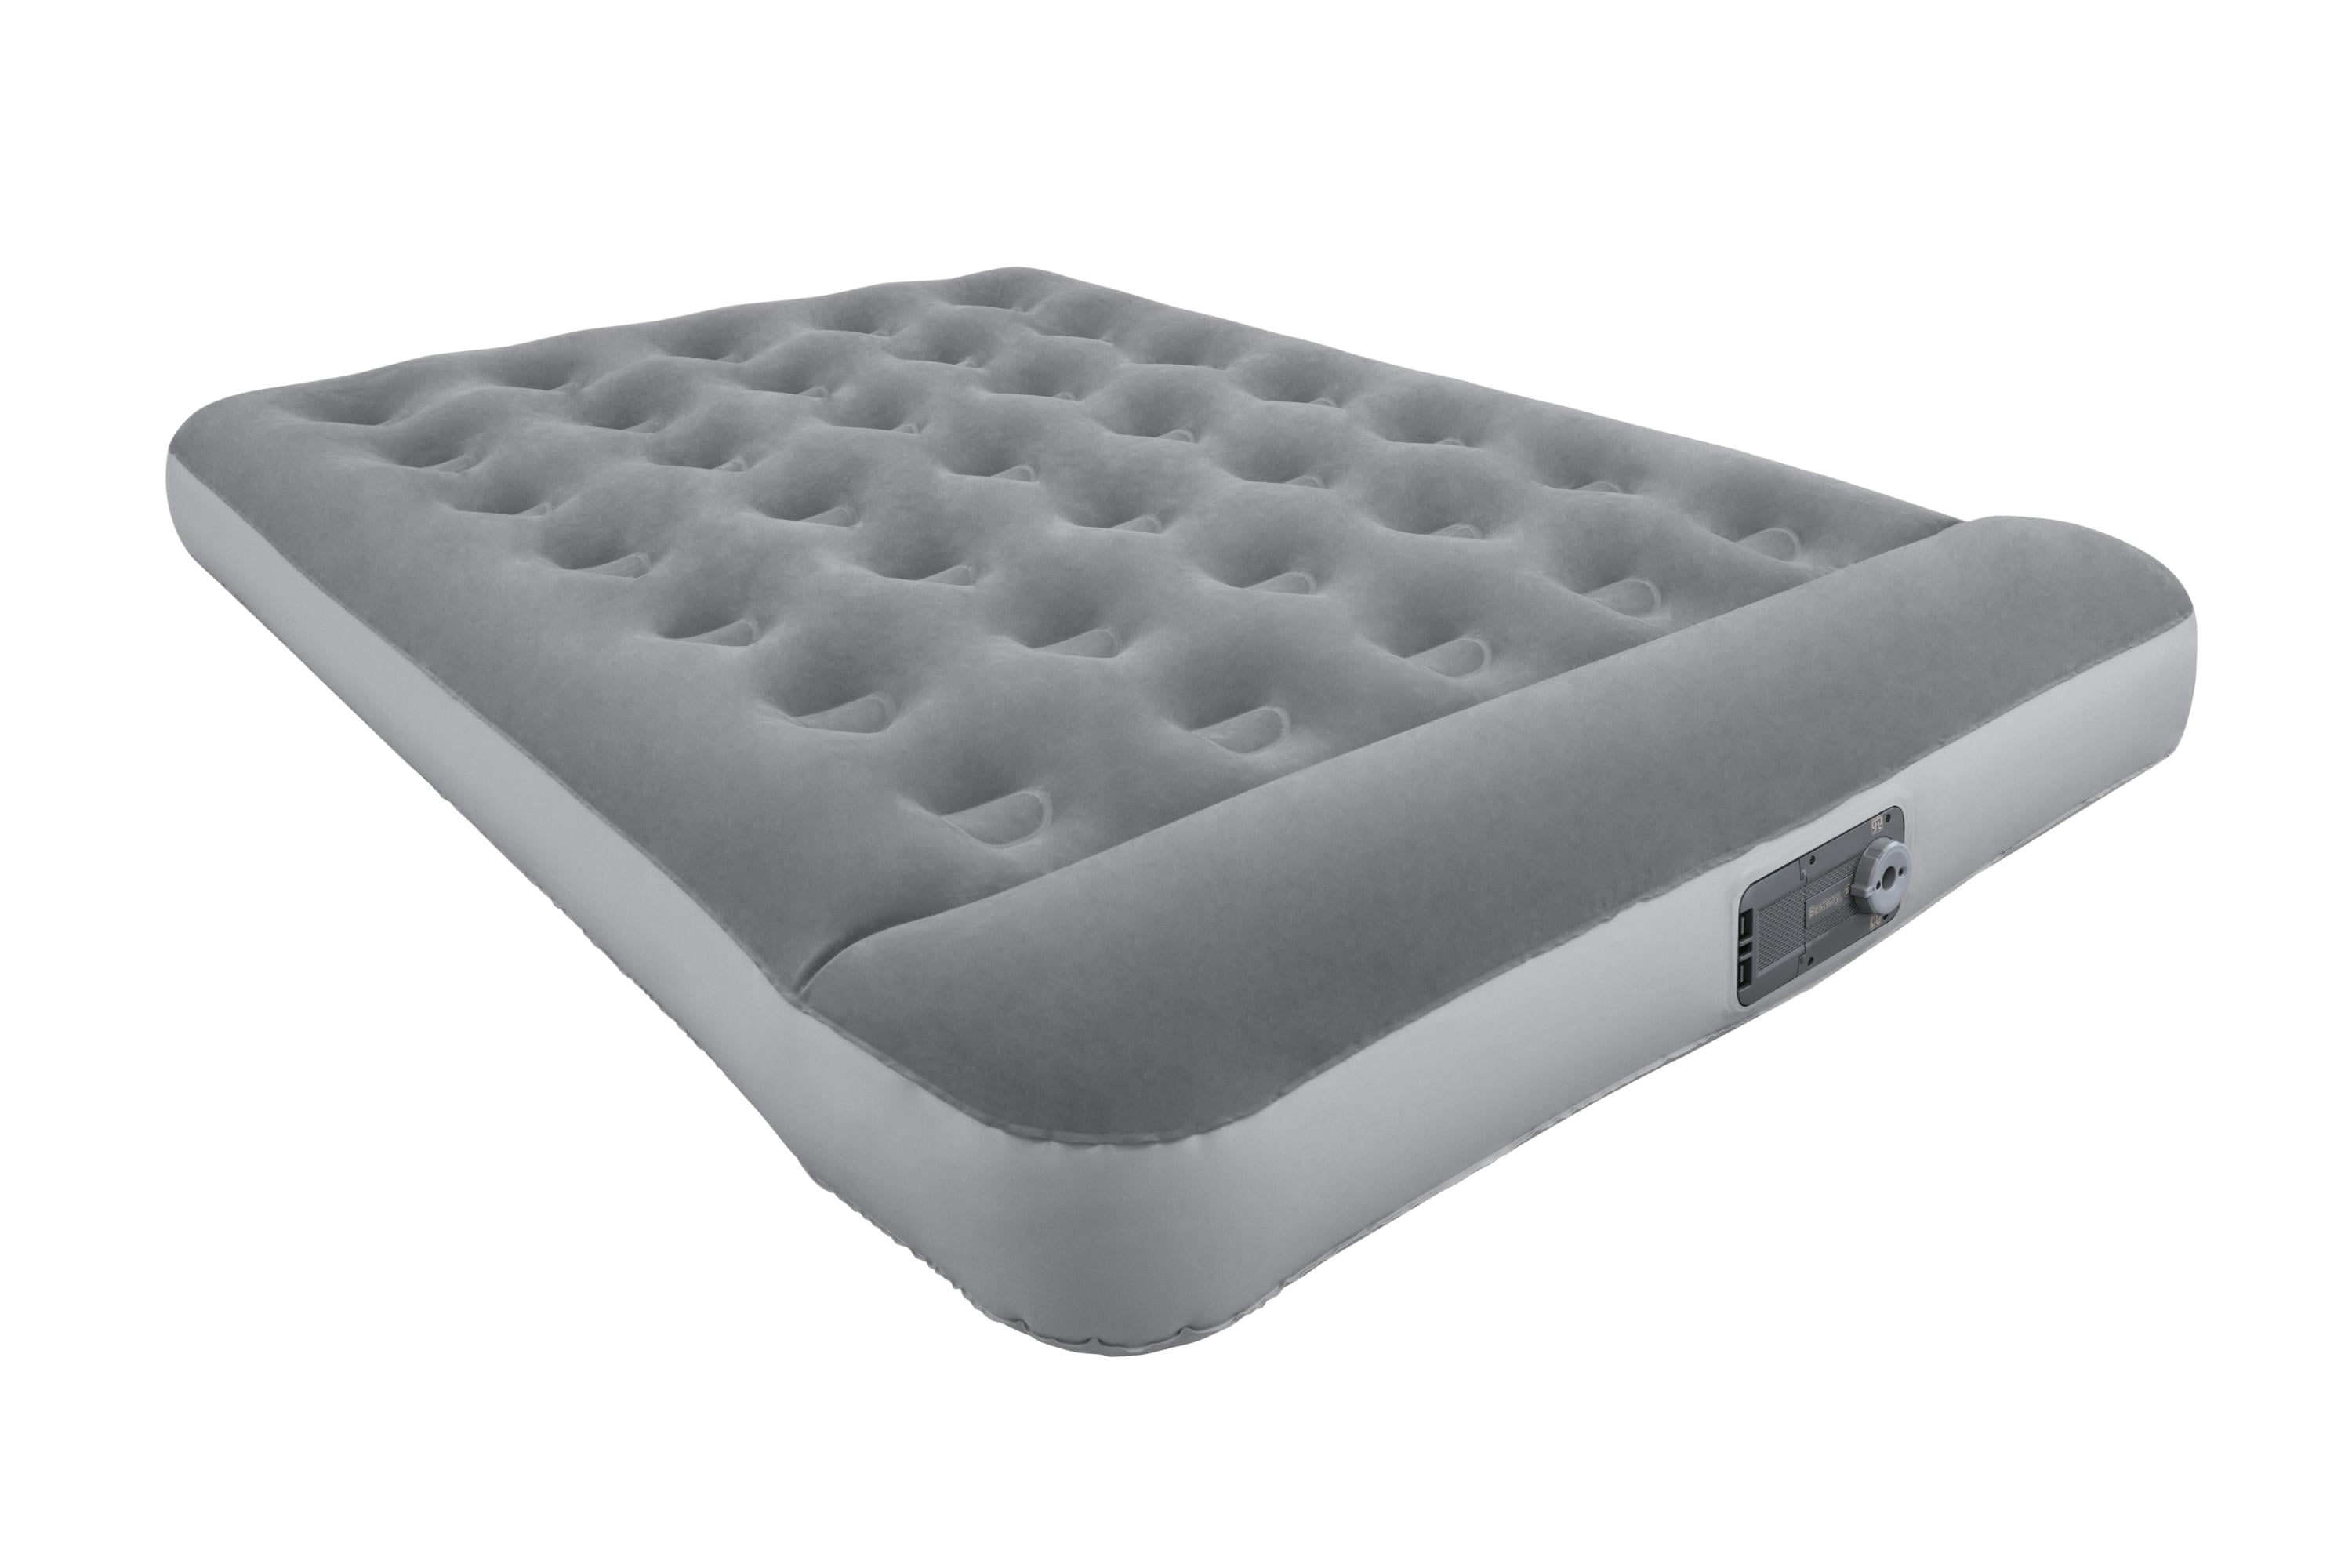 12" Air Mattress with Built in AC Pump Flocked Airbed Camping Full Size 